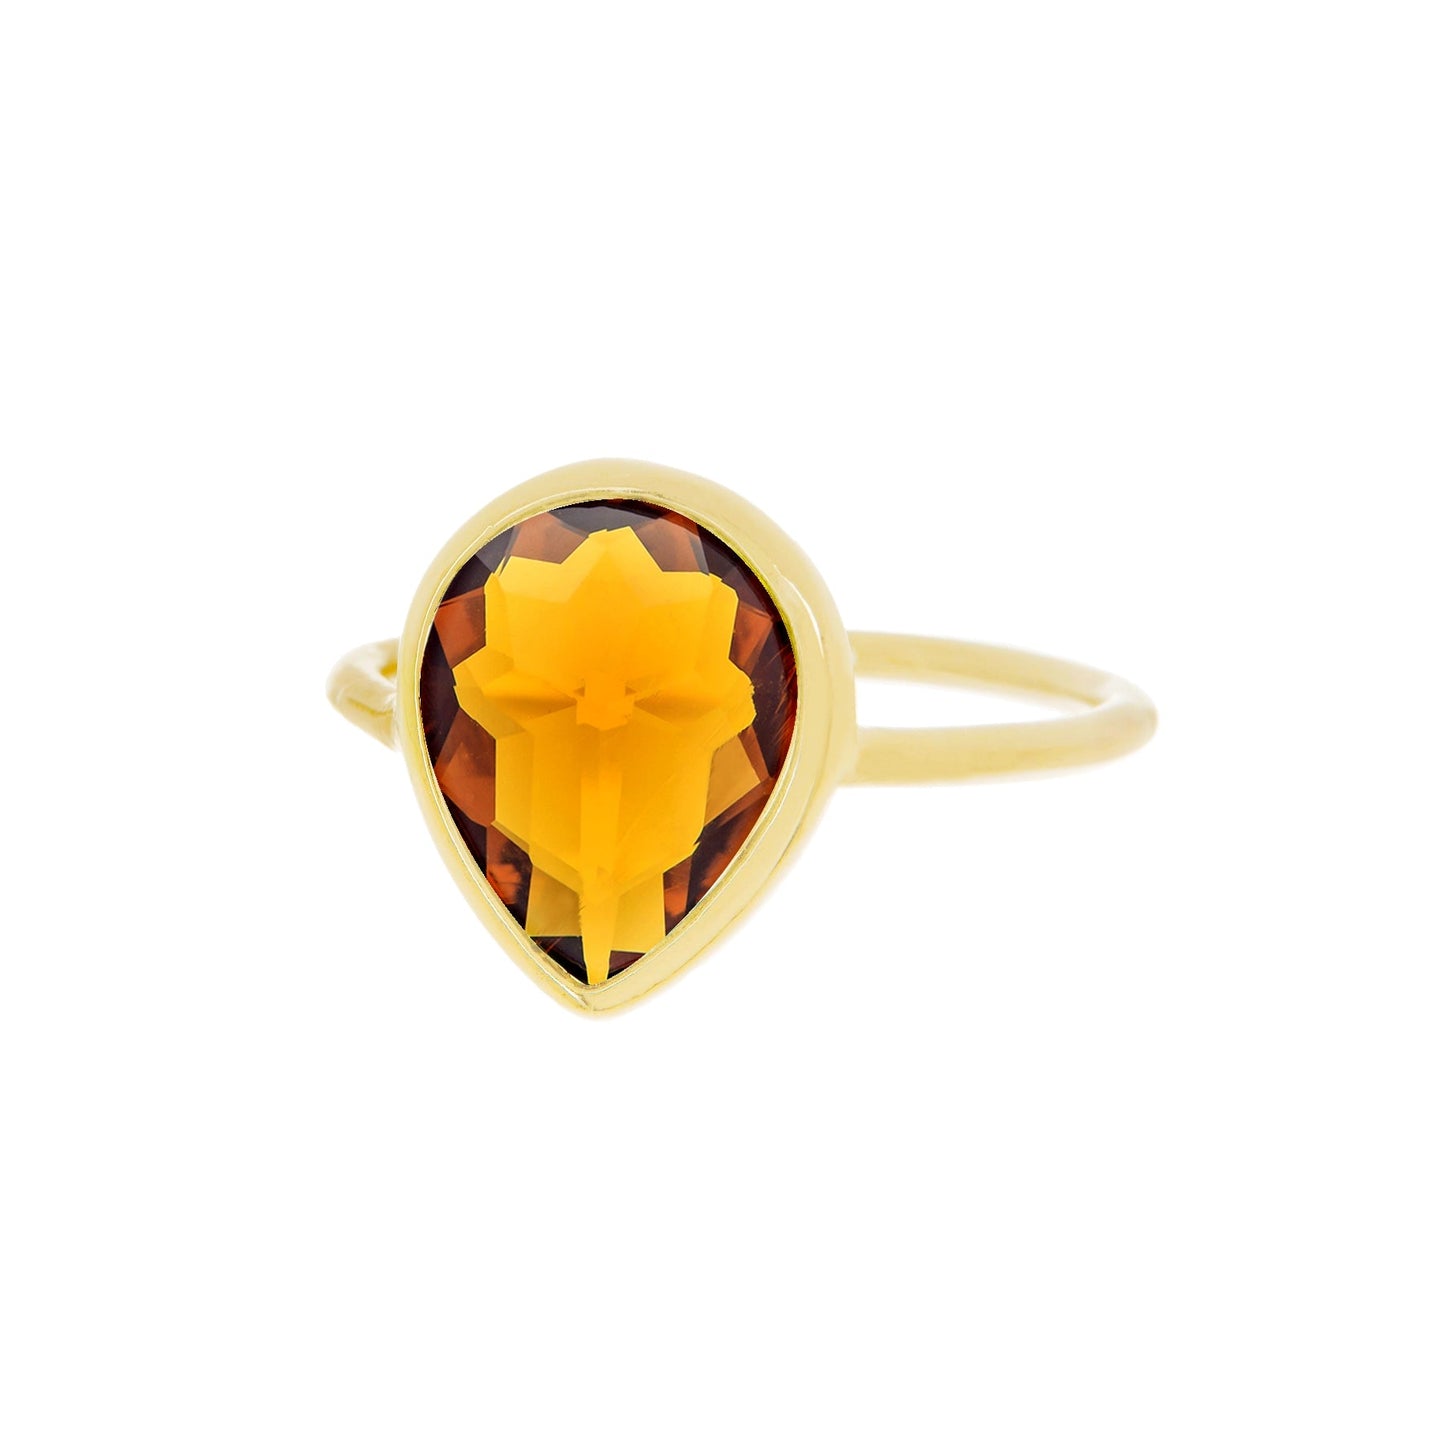 Amber Crystal Pear Ring in 14k - Size 8 - Mellow Monkey